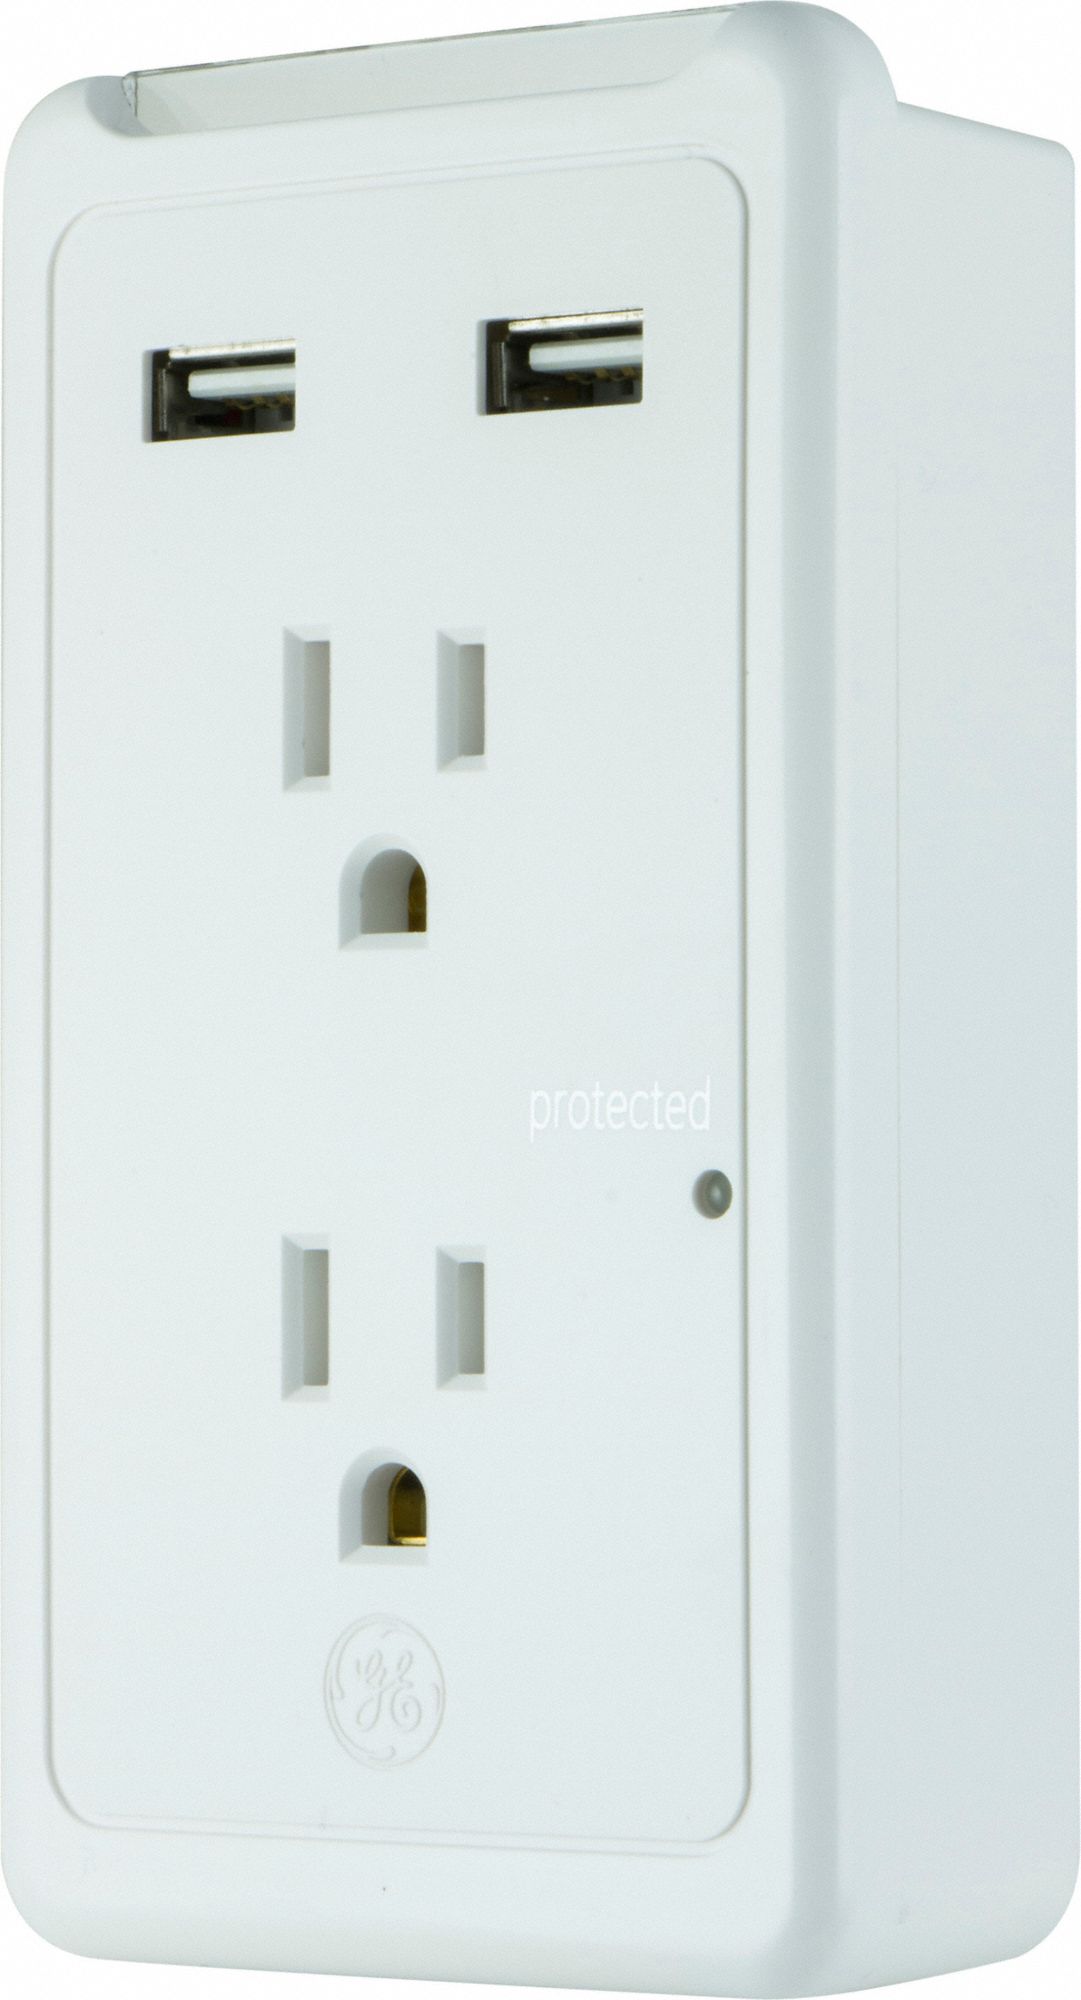 Surge Protector Tap,125V,450 Joules